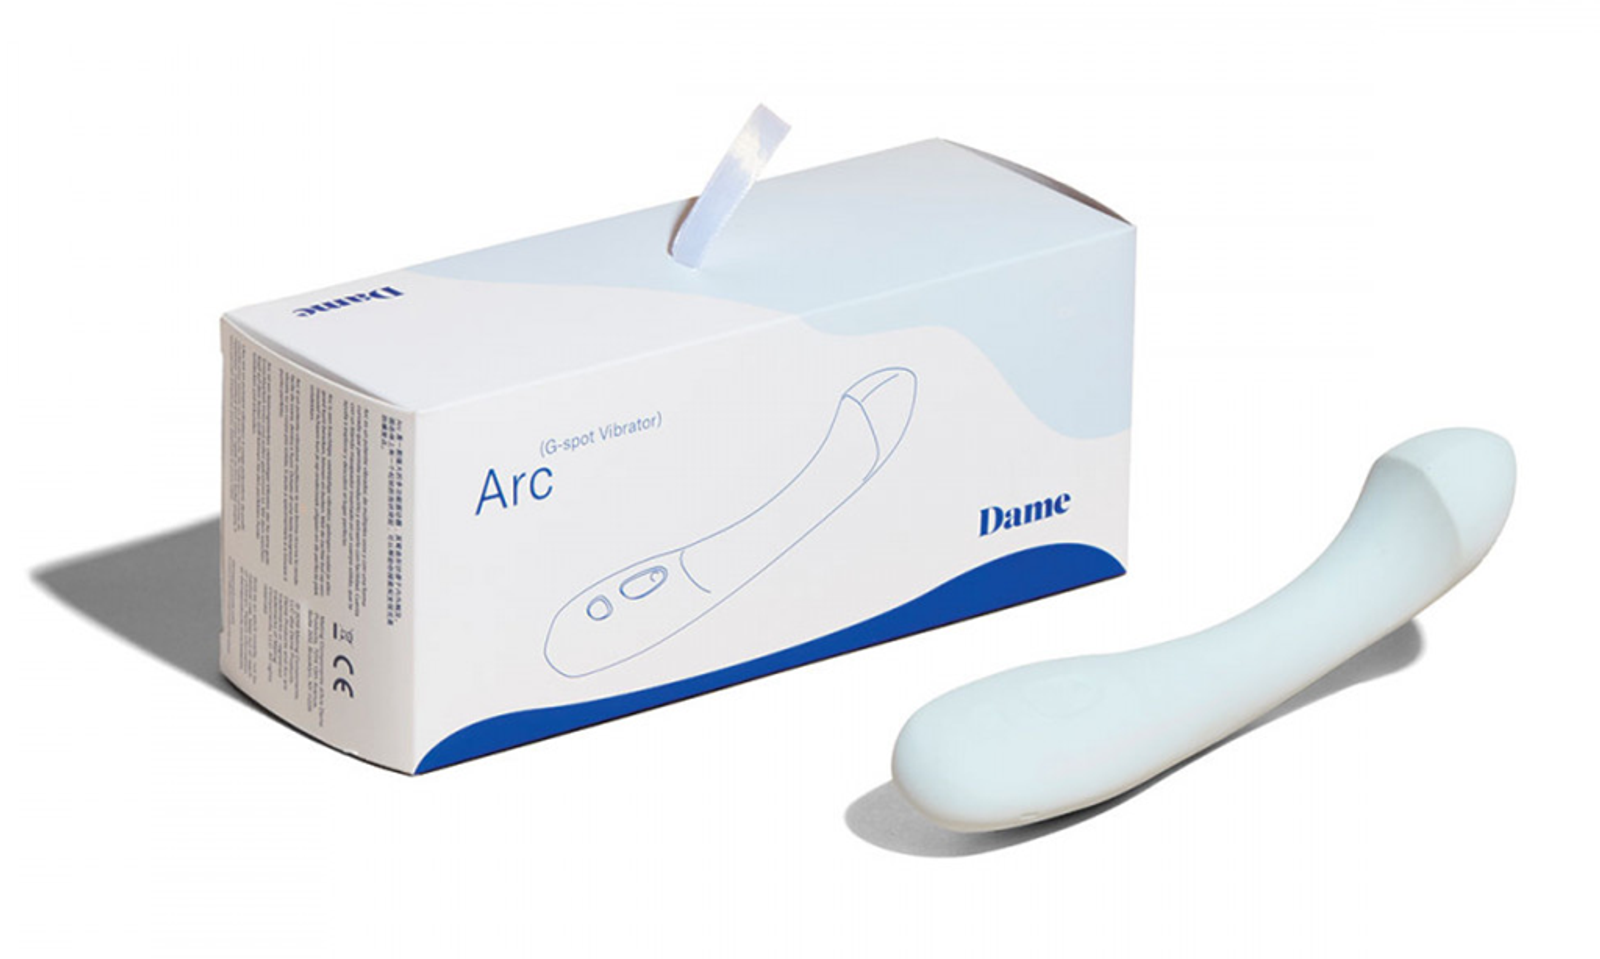 Entrenue Now Shipping Dame Products' New ‘Arc’ G-spot Vibrator